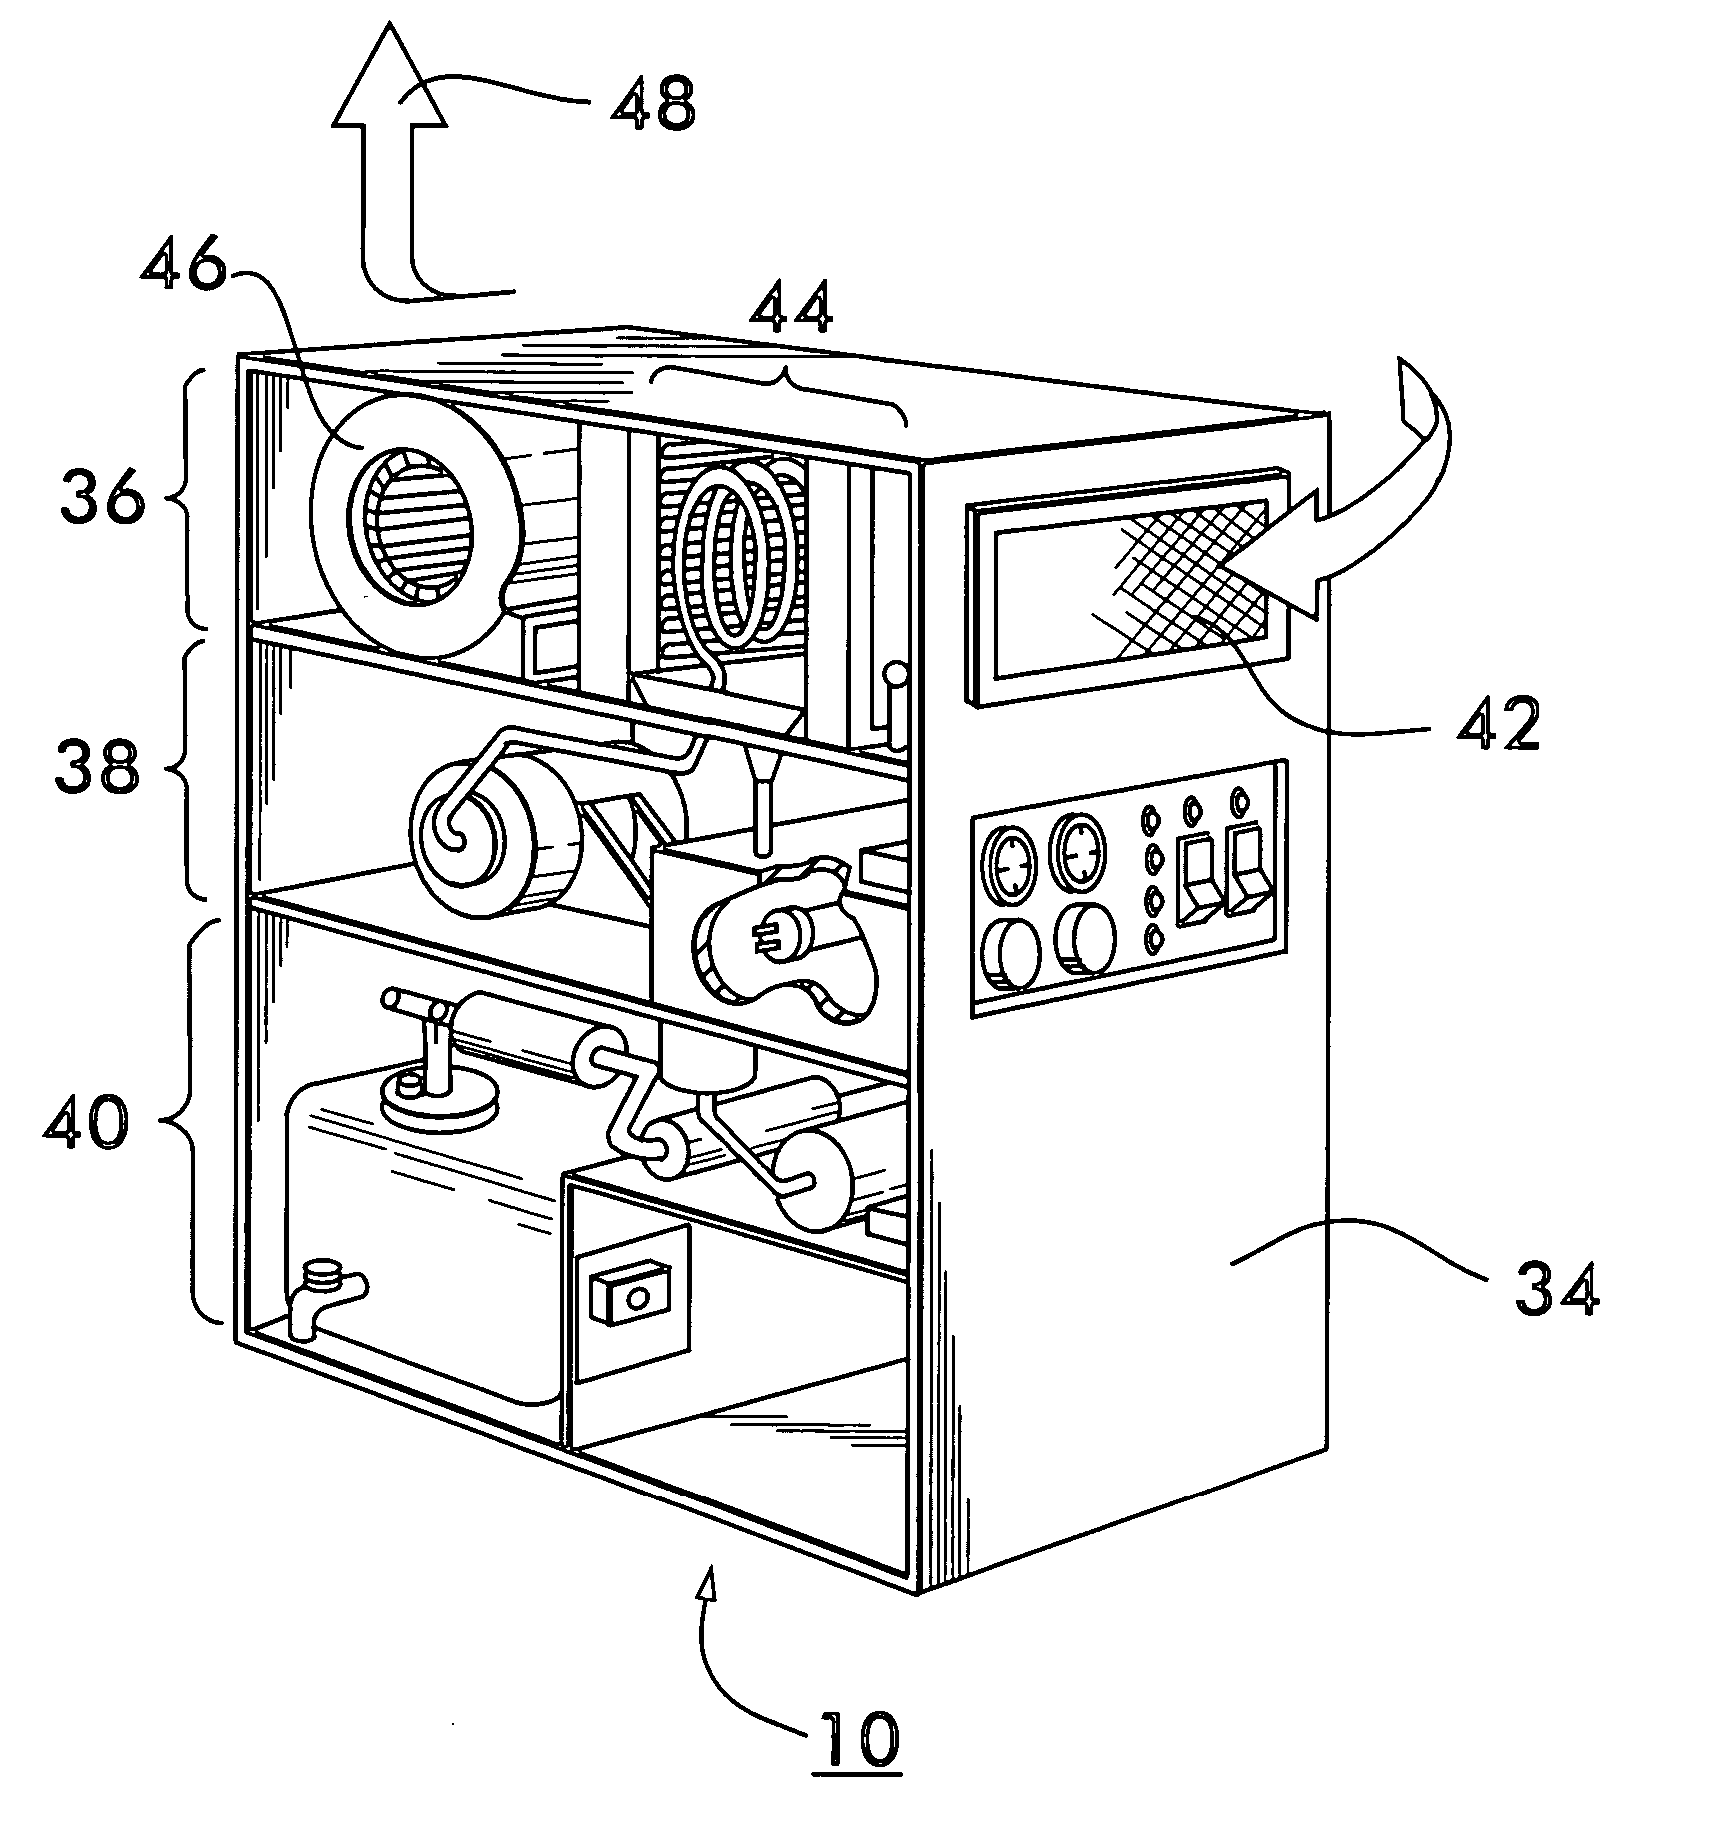 Co-generation power system for supplying electricity to an air-water recovery system